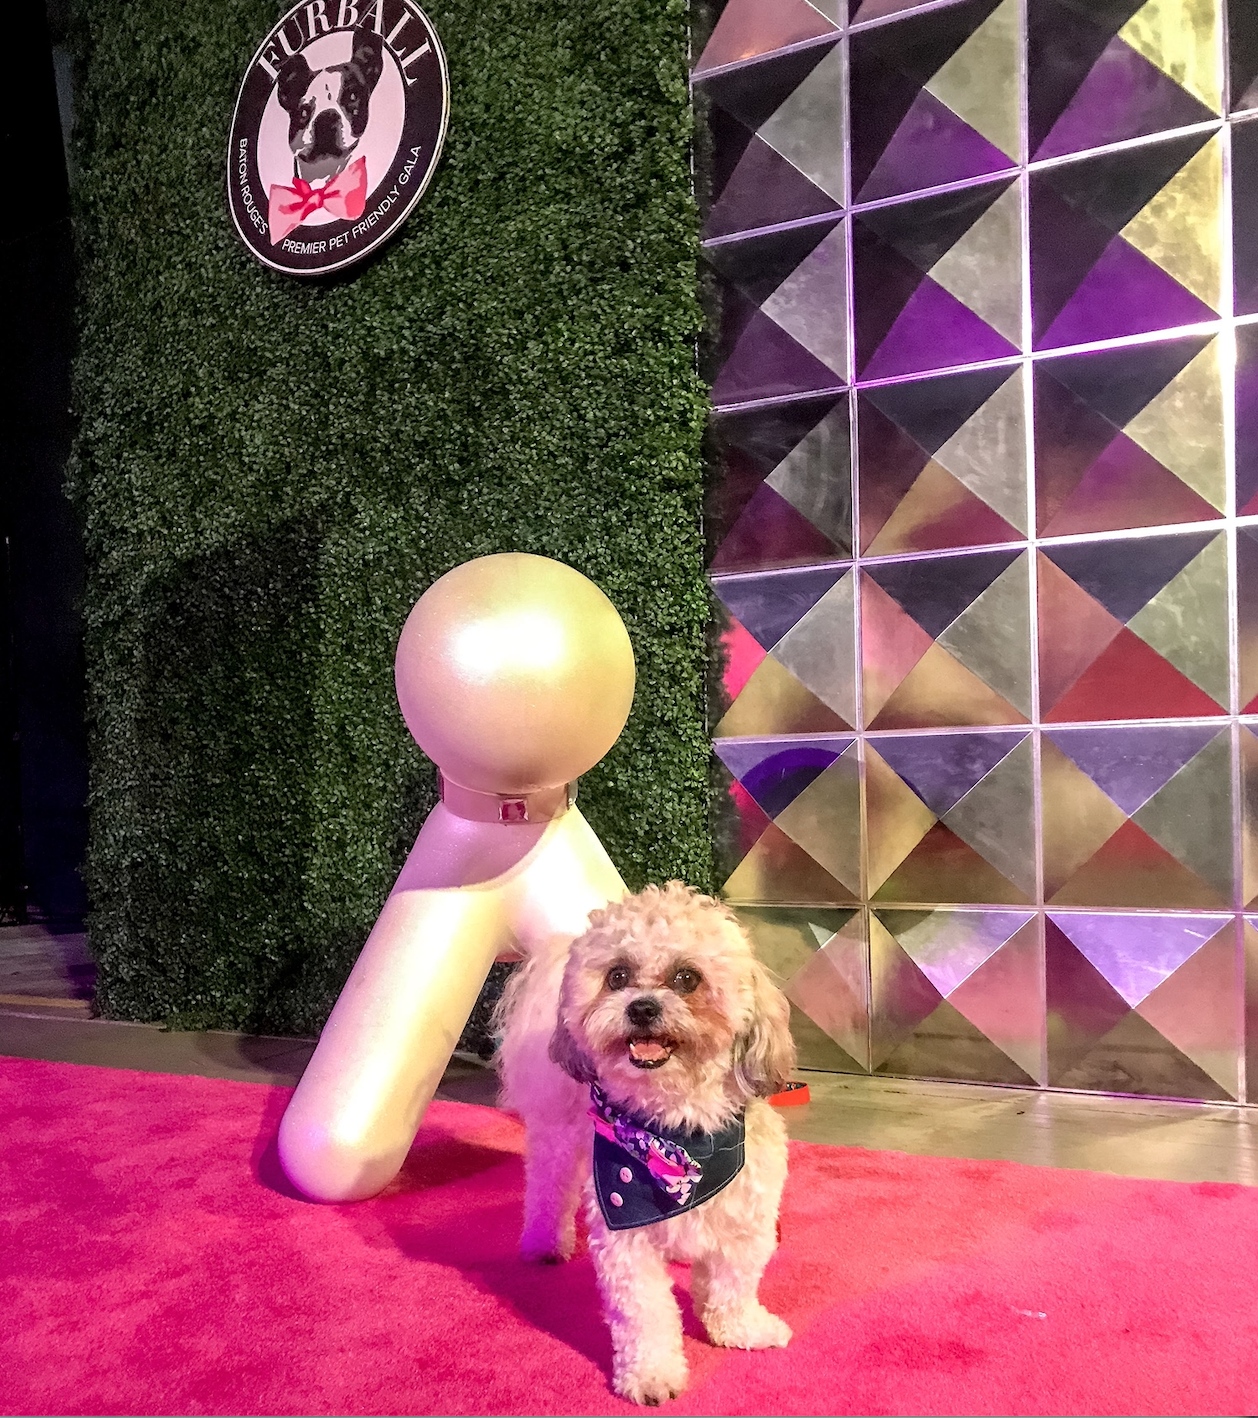 THE FURBALL: BATON ROUGE’S PET FRIENDLY GALA: WHAT TO KNOW AND HOW TO ATTEND